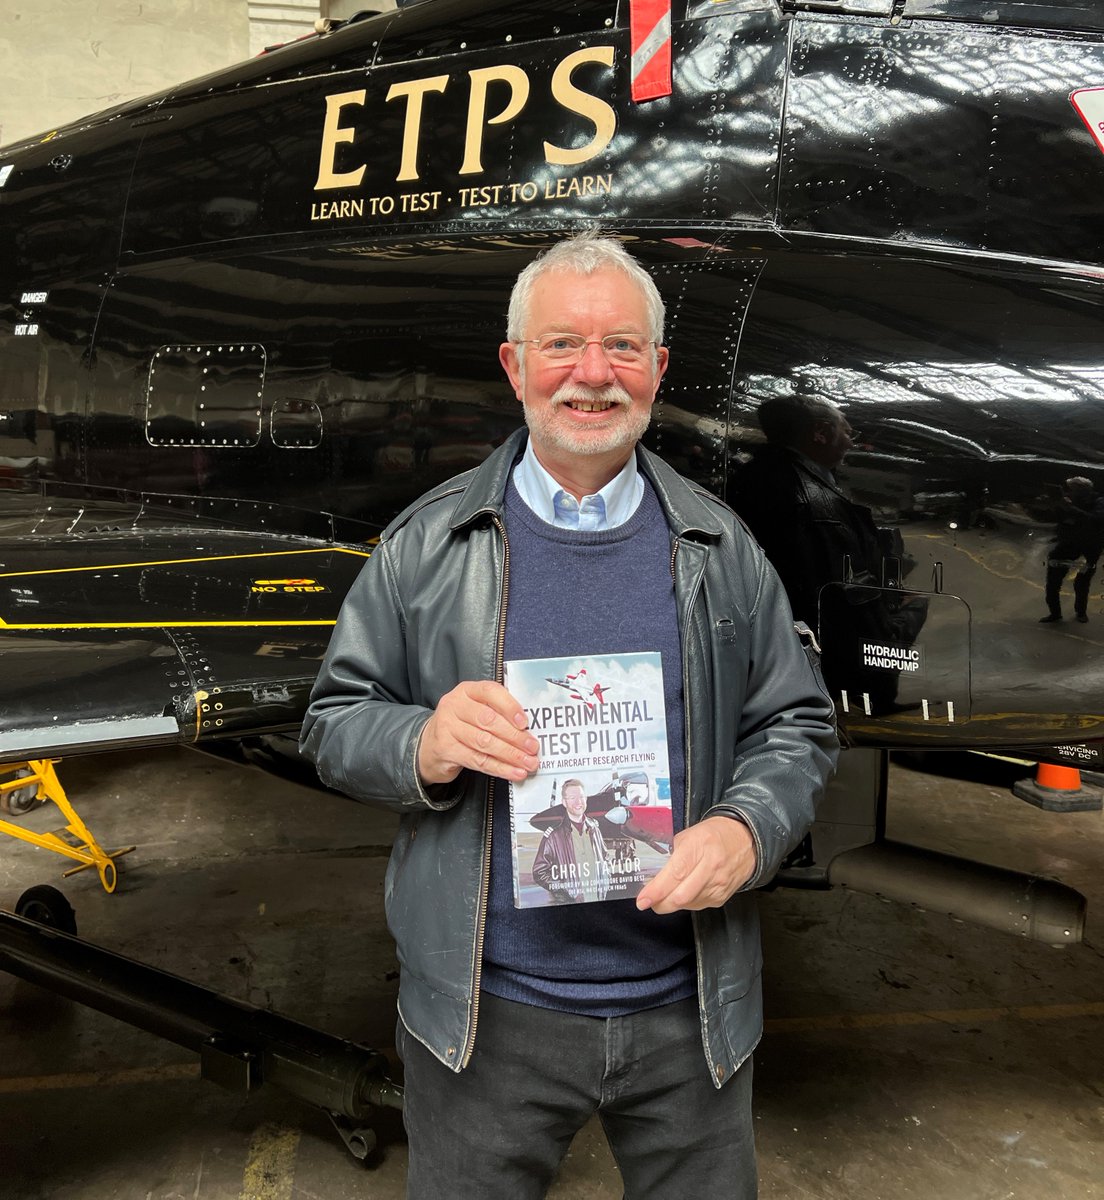 Dropped into the Boscombe Down Aviation Collection at Old Sarum this morning with me new book Experimental Test Pilot - available to pre-order from Pen & Sword for £21- should be shipped soon. #testpilotbook #bookreview #bookreviews #aviationgeek #aviationgeeks #aviation